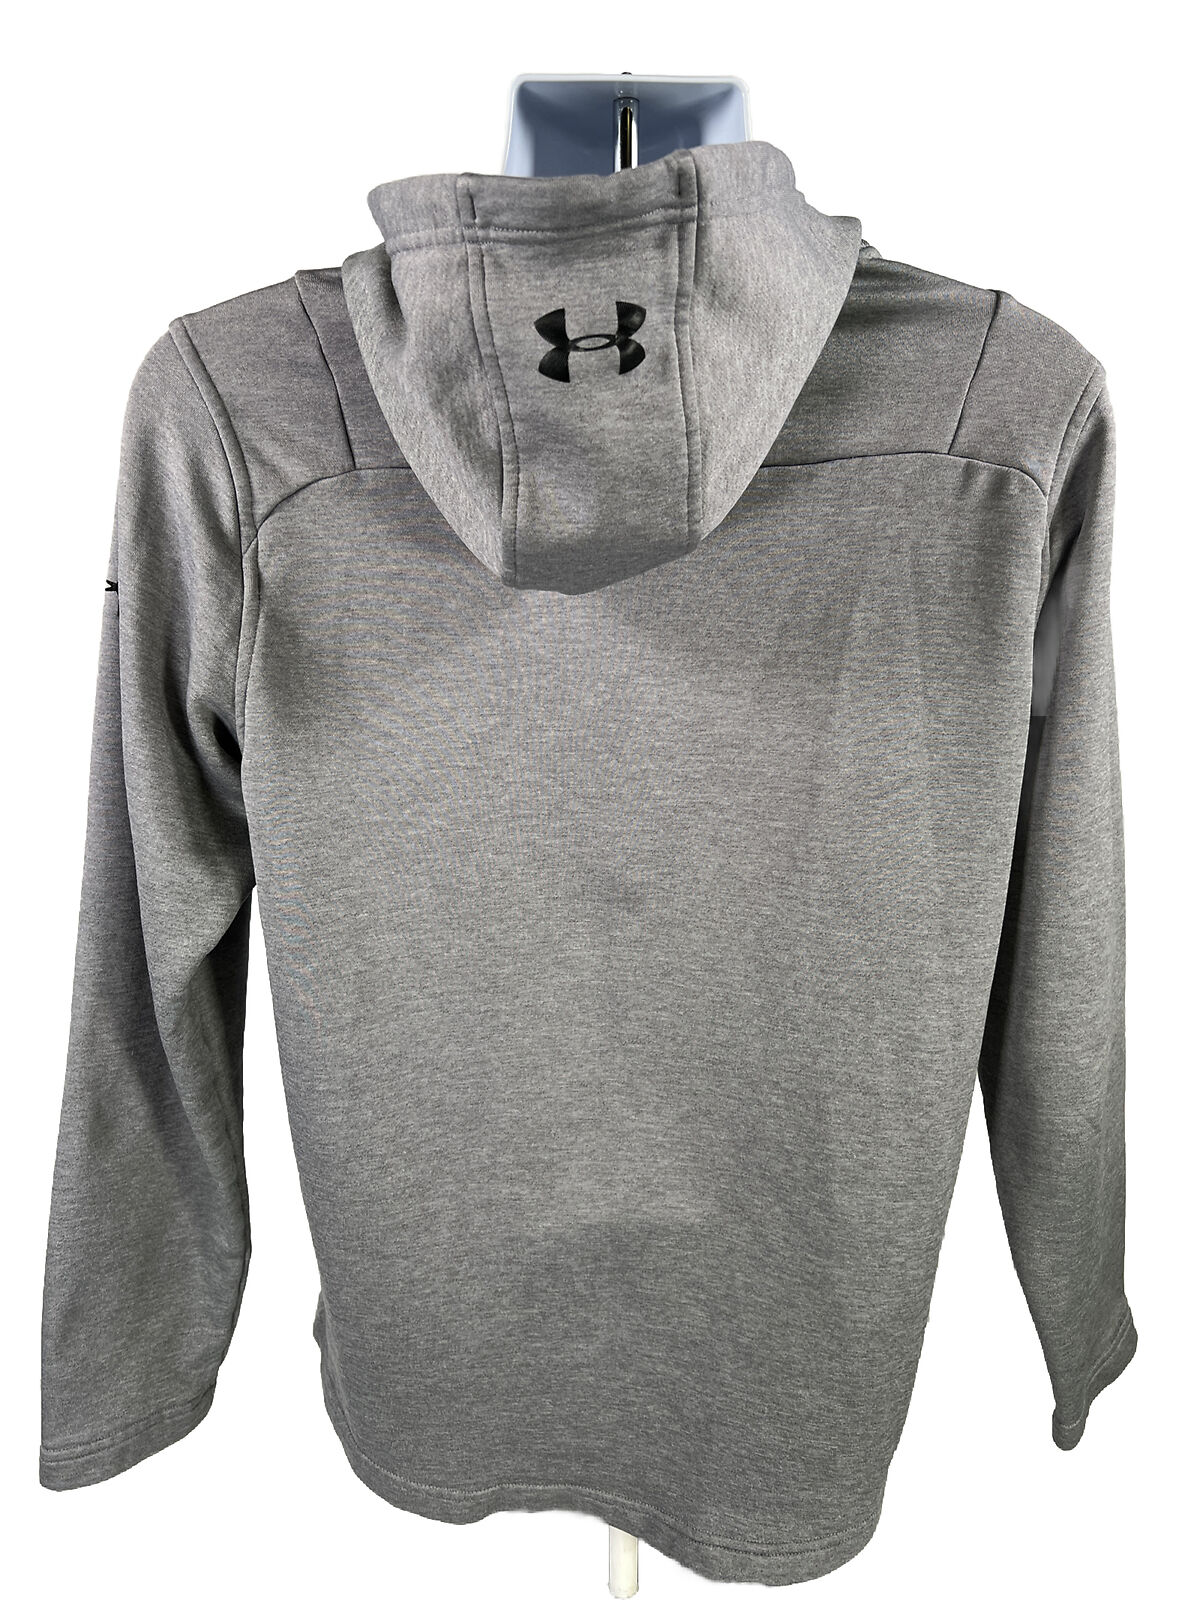 Under Armour Men's Gray MK1 Terry Fitted ColdGear Hoodie - M